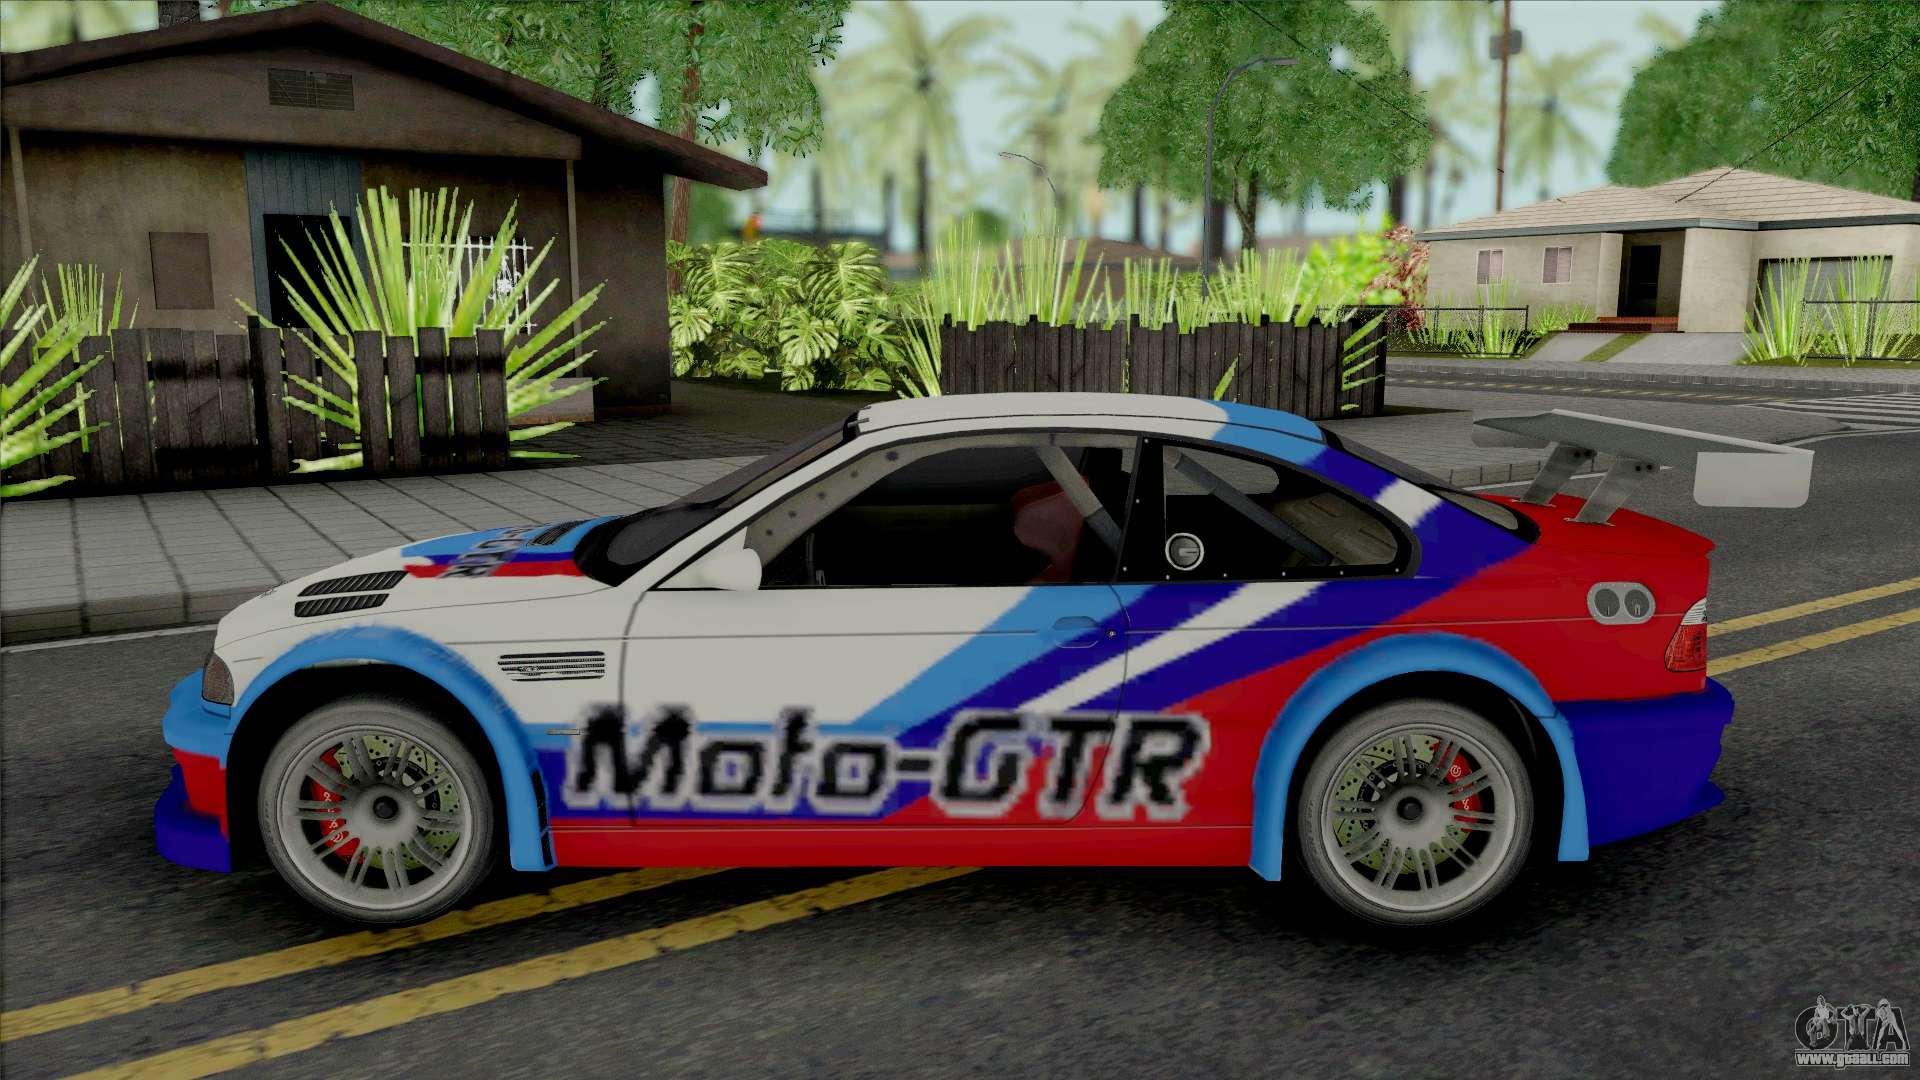 We can't have the Pepega Mod for NFS MW '05 yet, so I made the BMW M3 Most  Wanted Livery for Golf in NFS World. : r/needforspeed